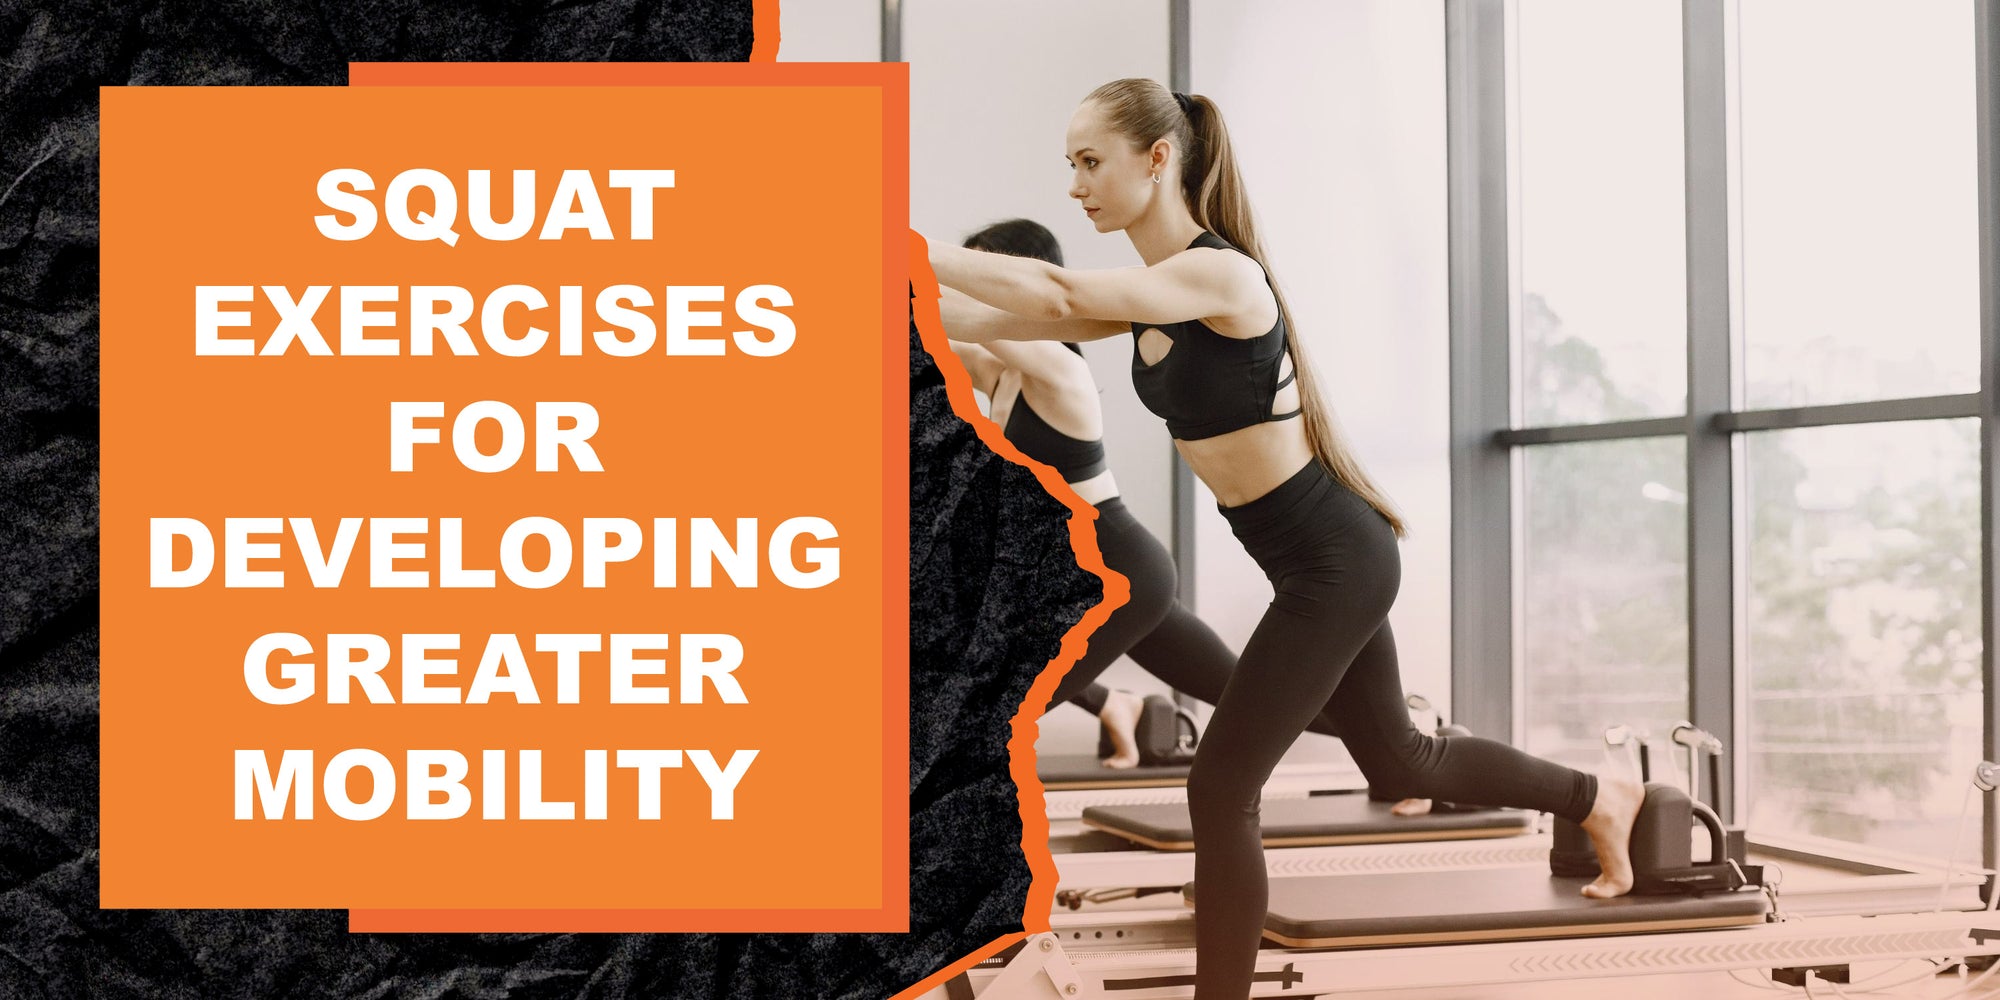 Squat Exercises for Developing Greater Mobility